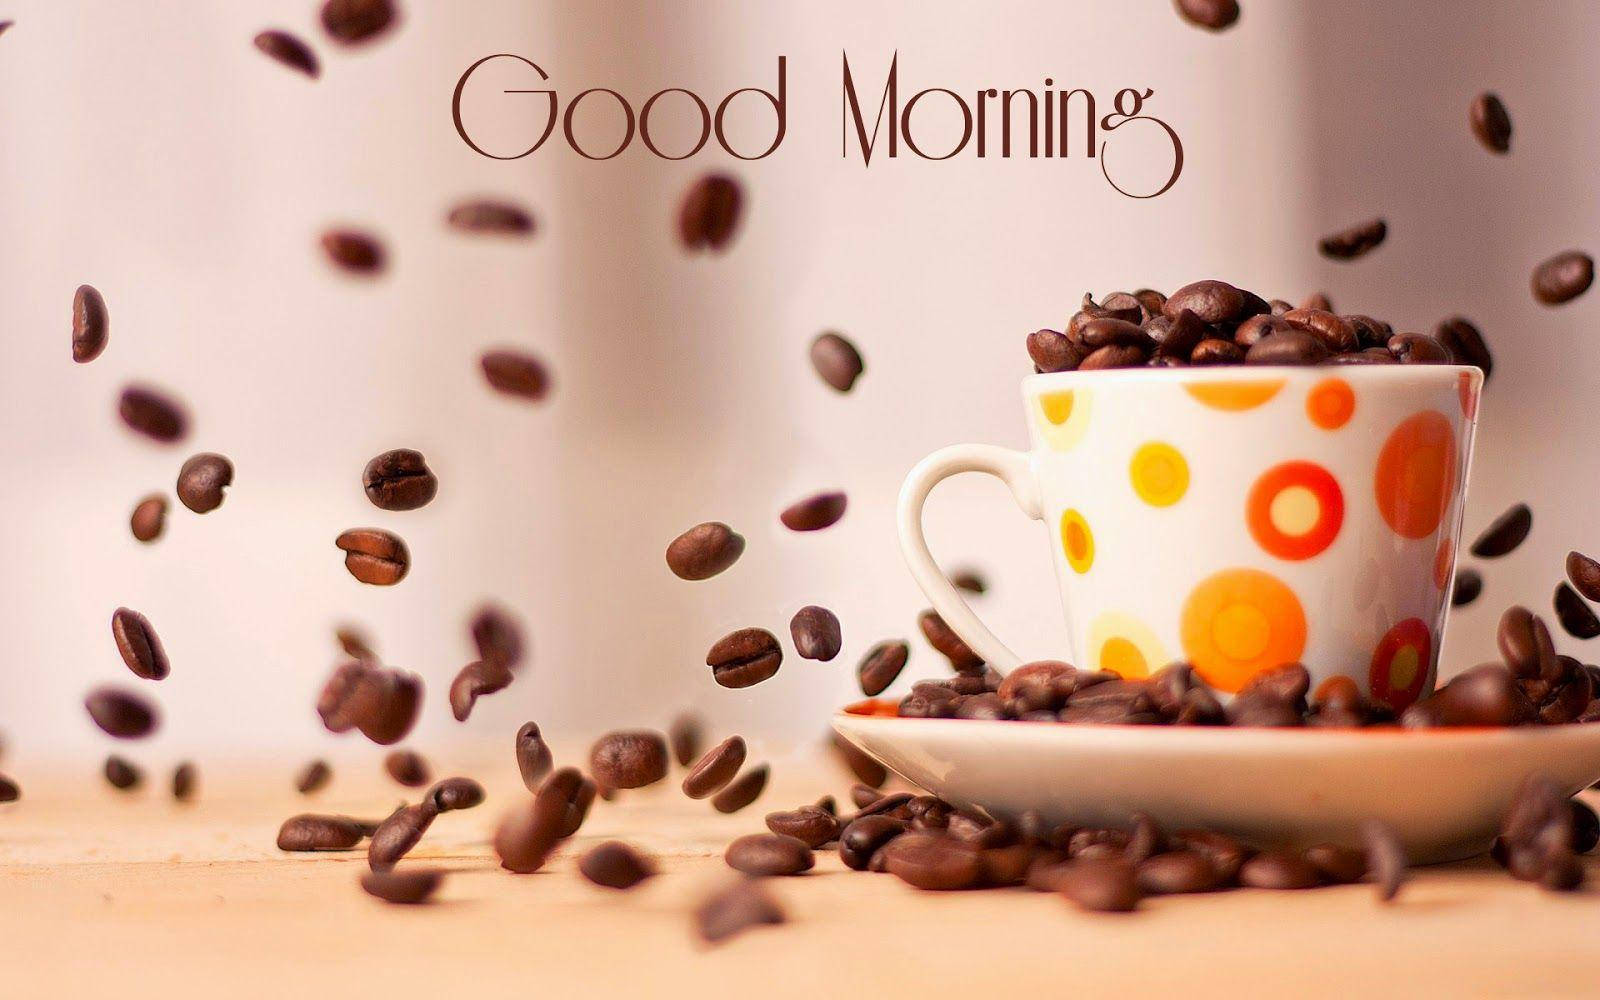 Good Morning Hd With Coffee Beans Wallpaper